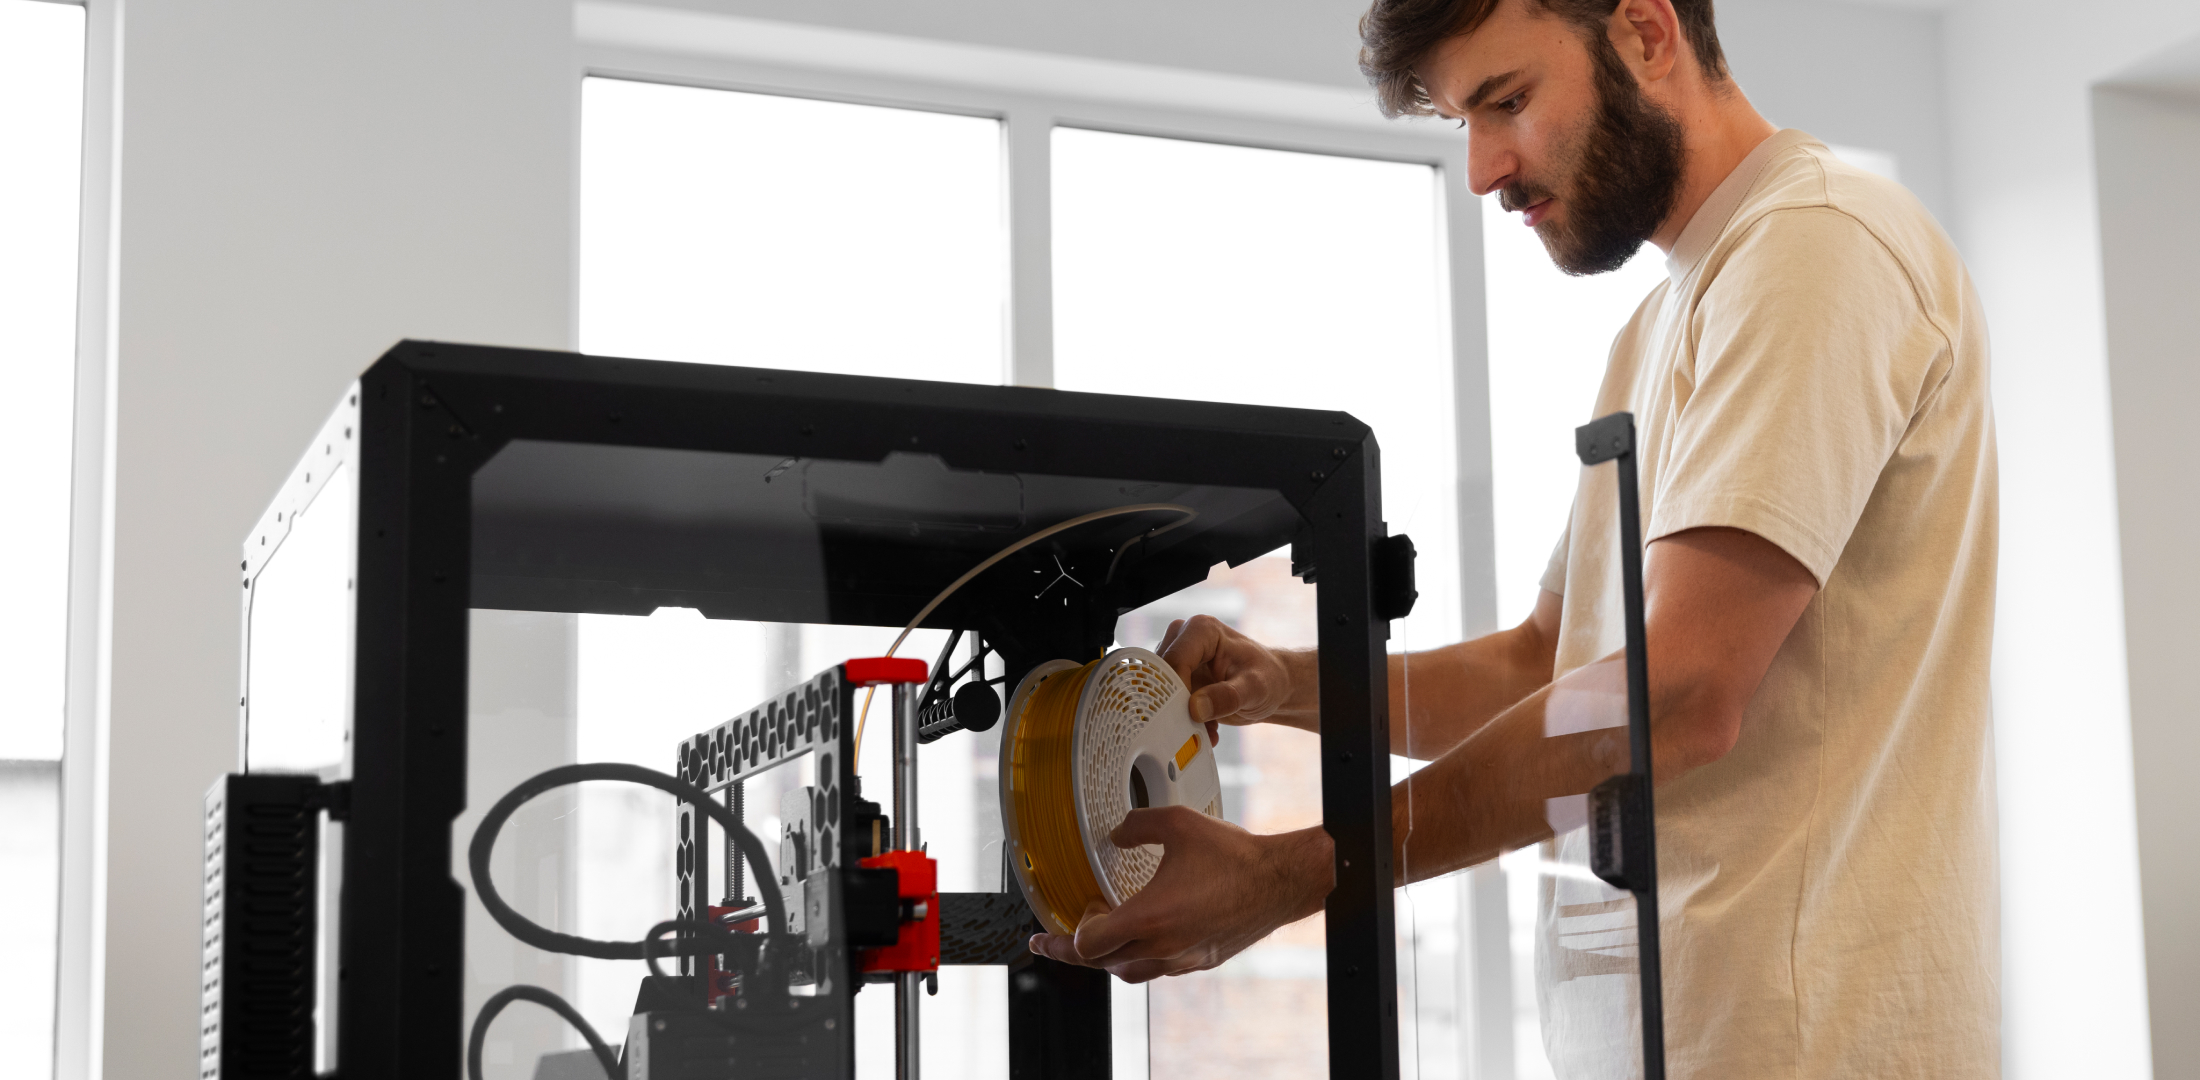 Discover Self 3D Printing & Modeling